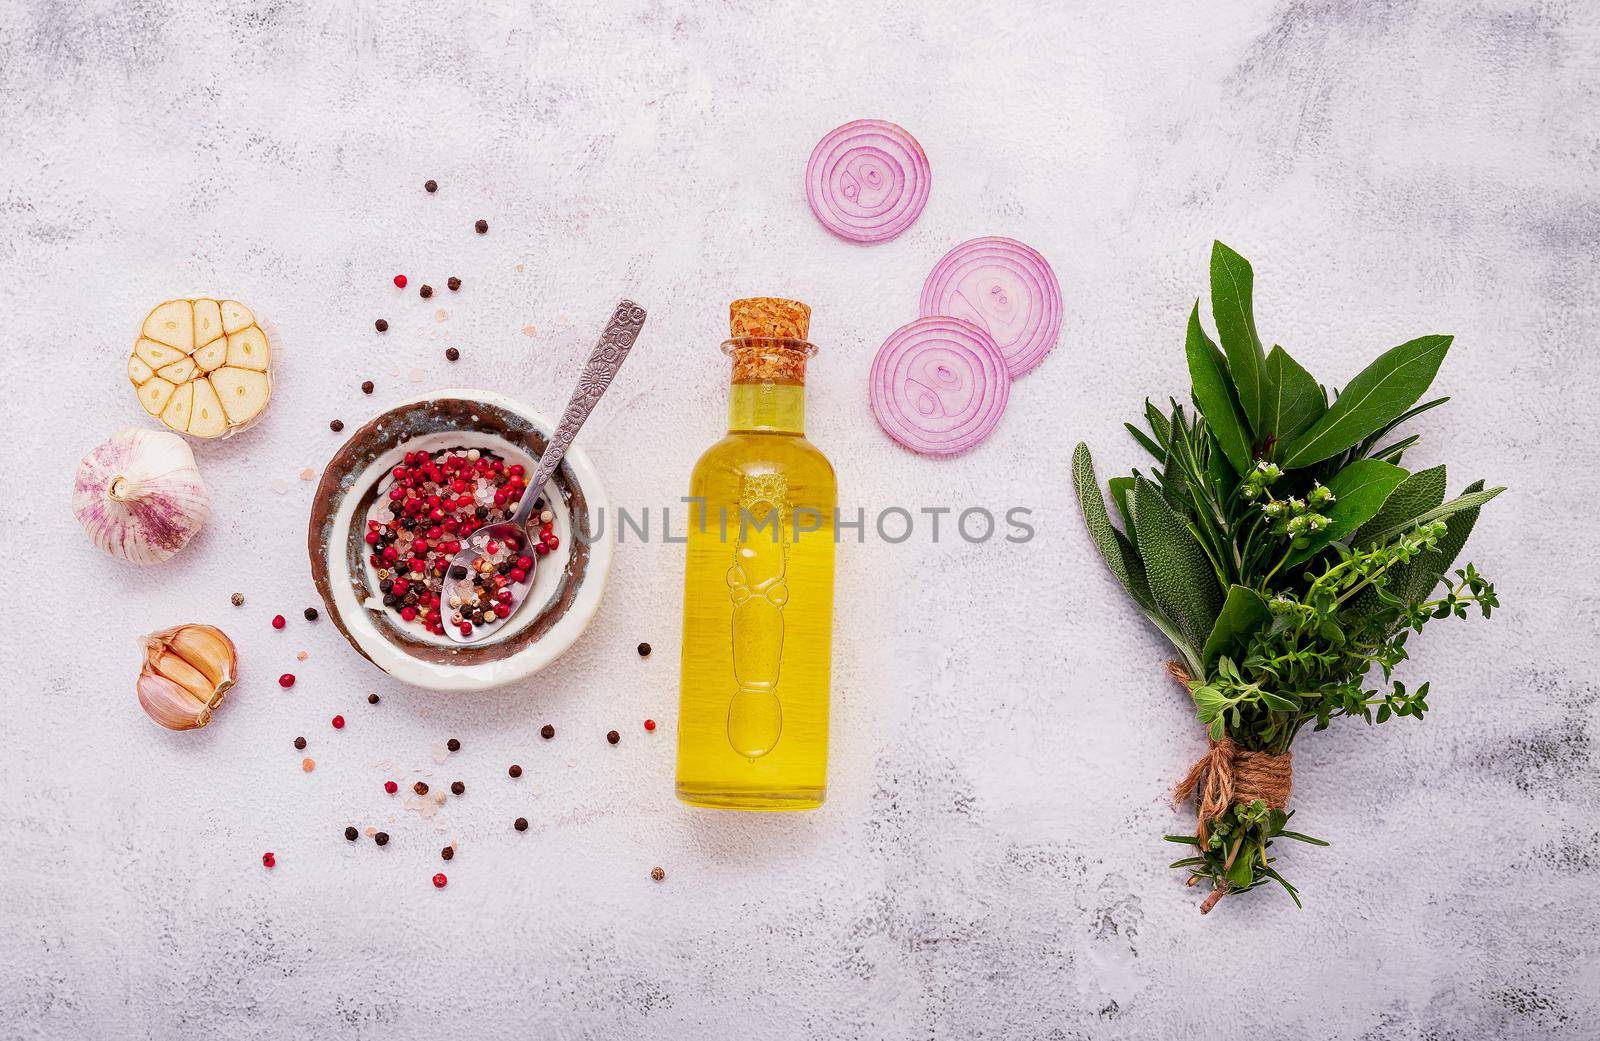 Ingredients for steak seasoning in ceramic bowl set up on white concrete background with copy space.
